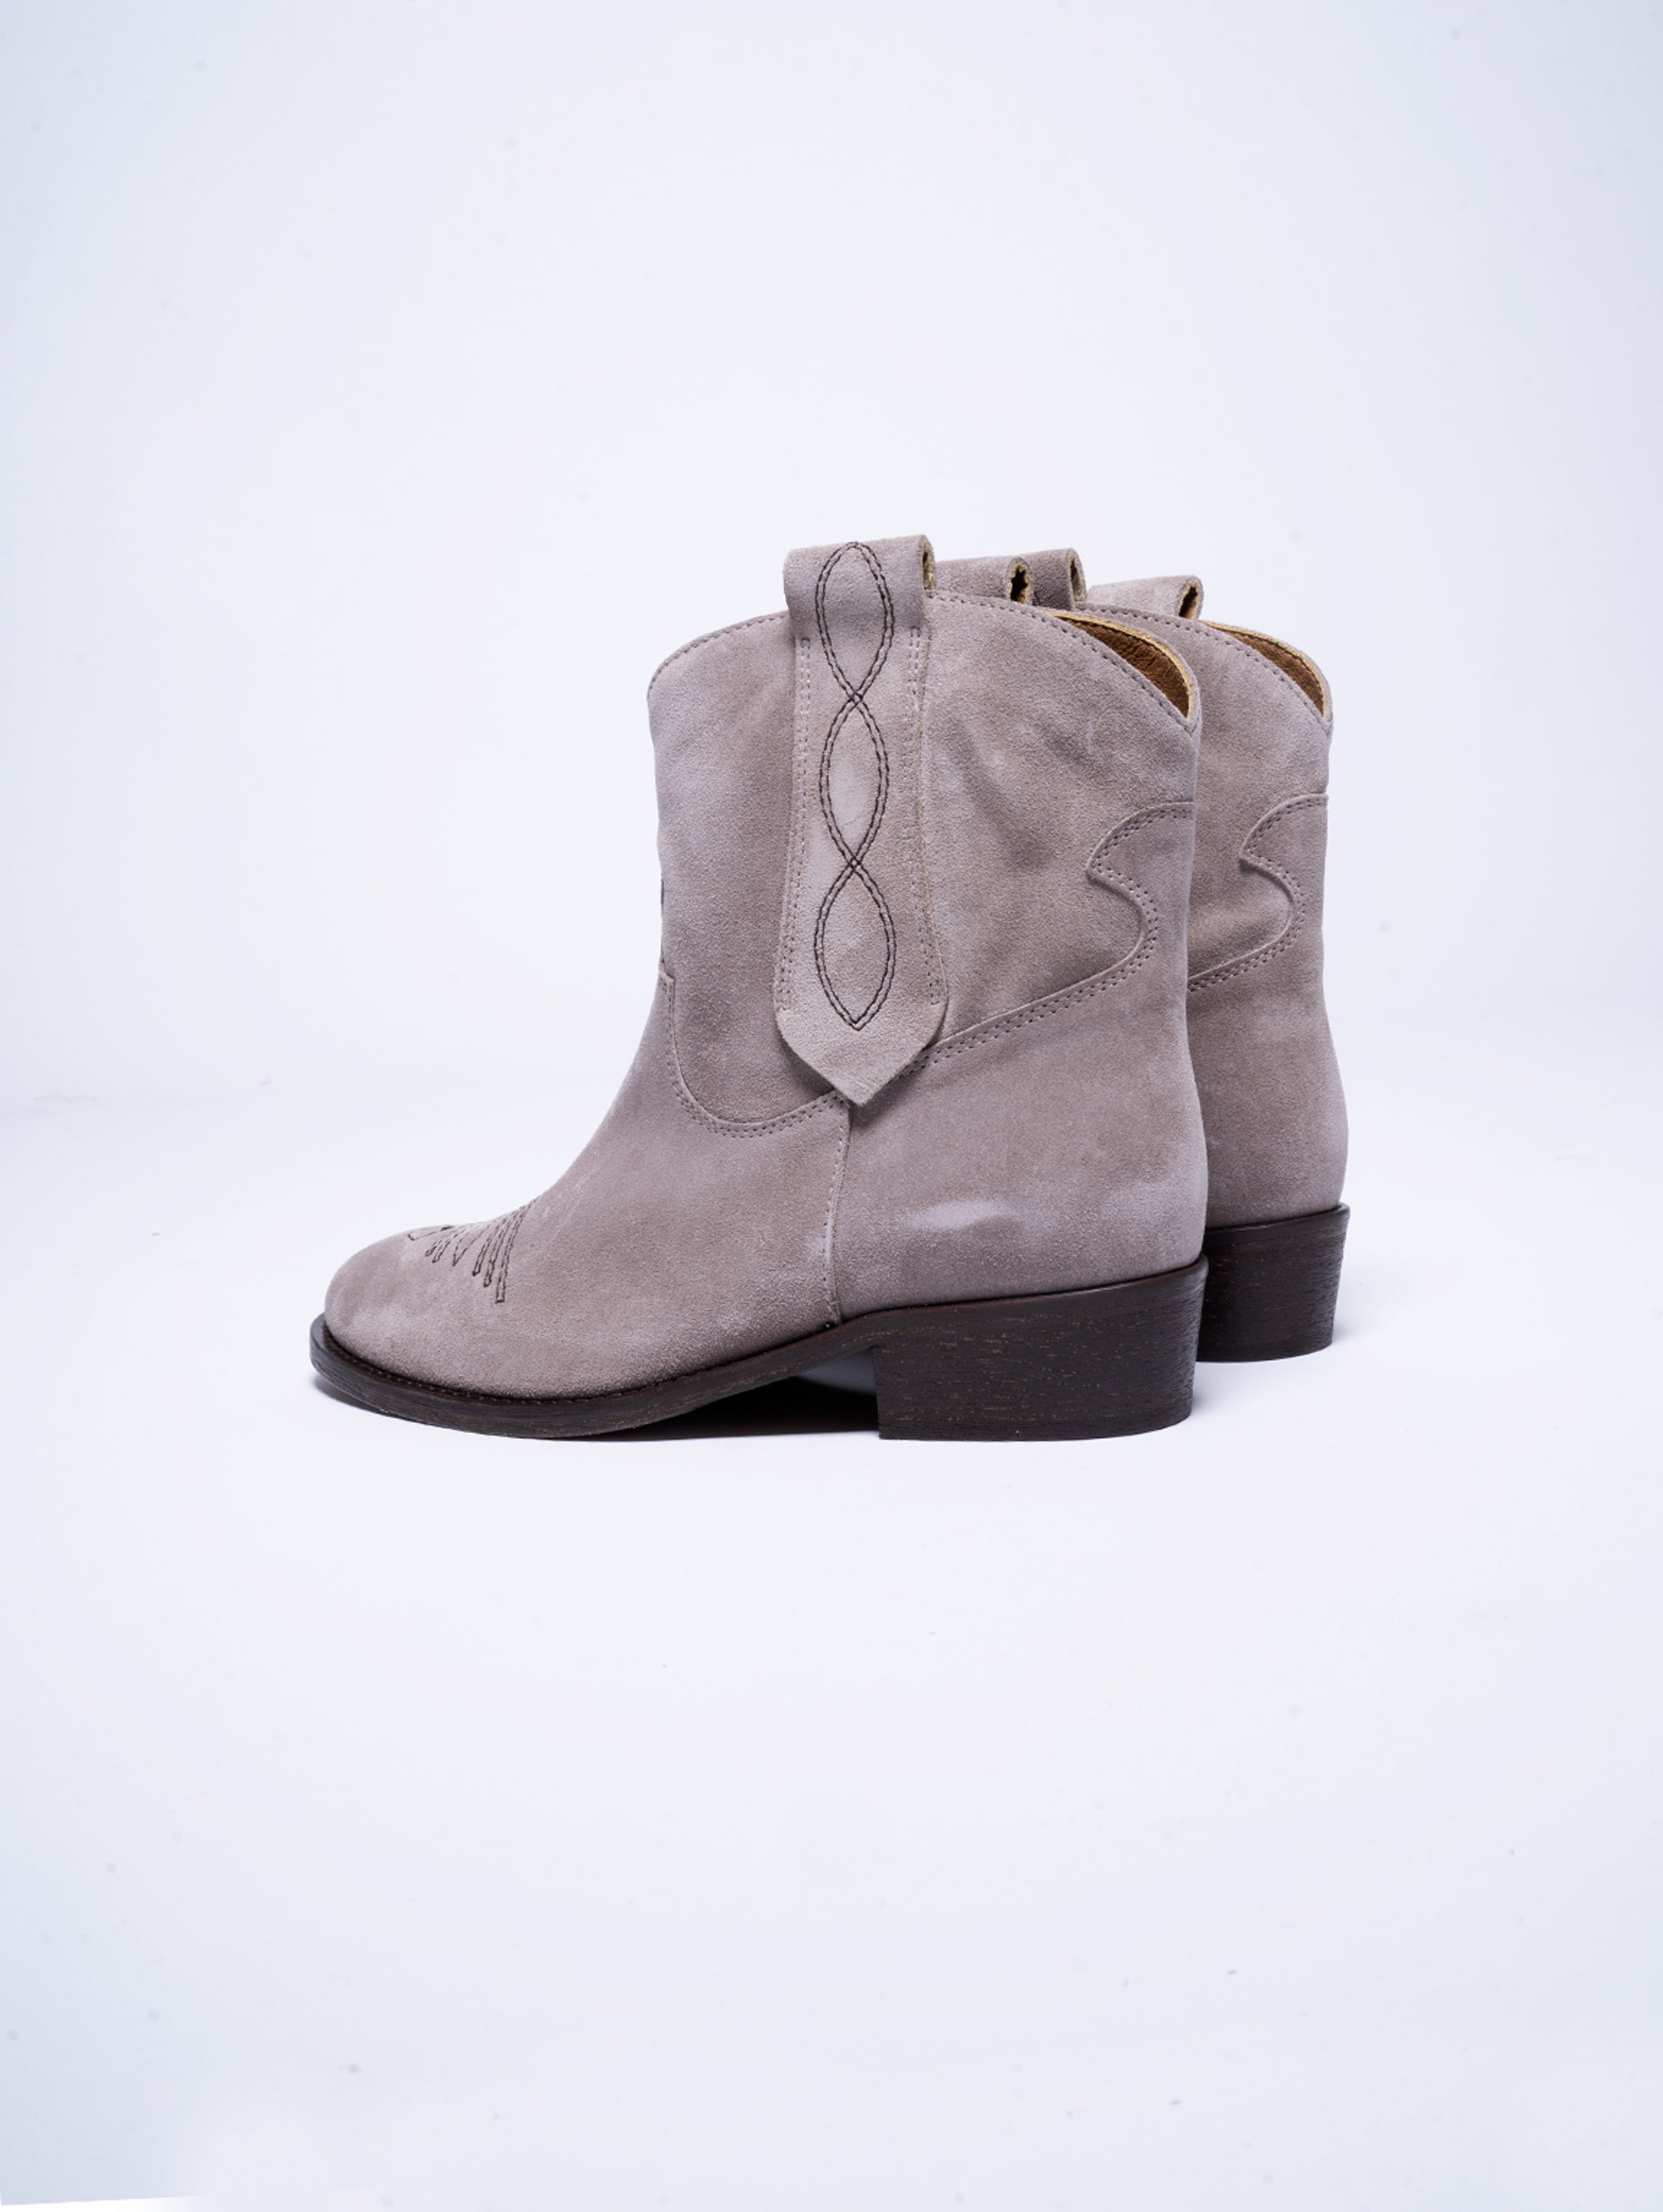 Texan ankle boots with brown stitching